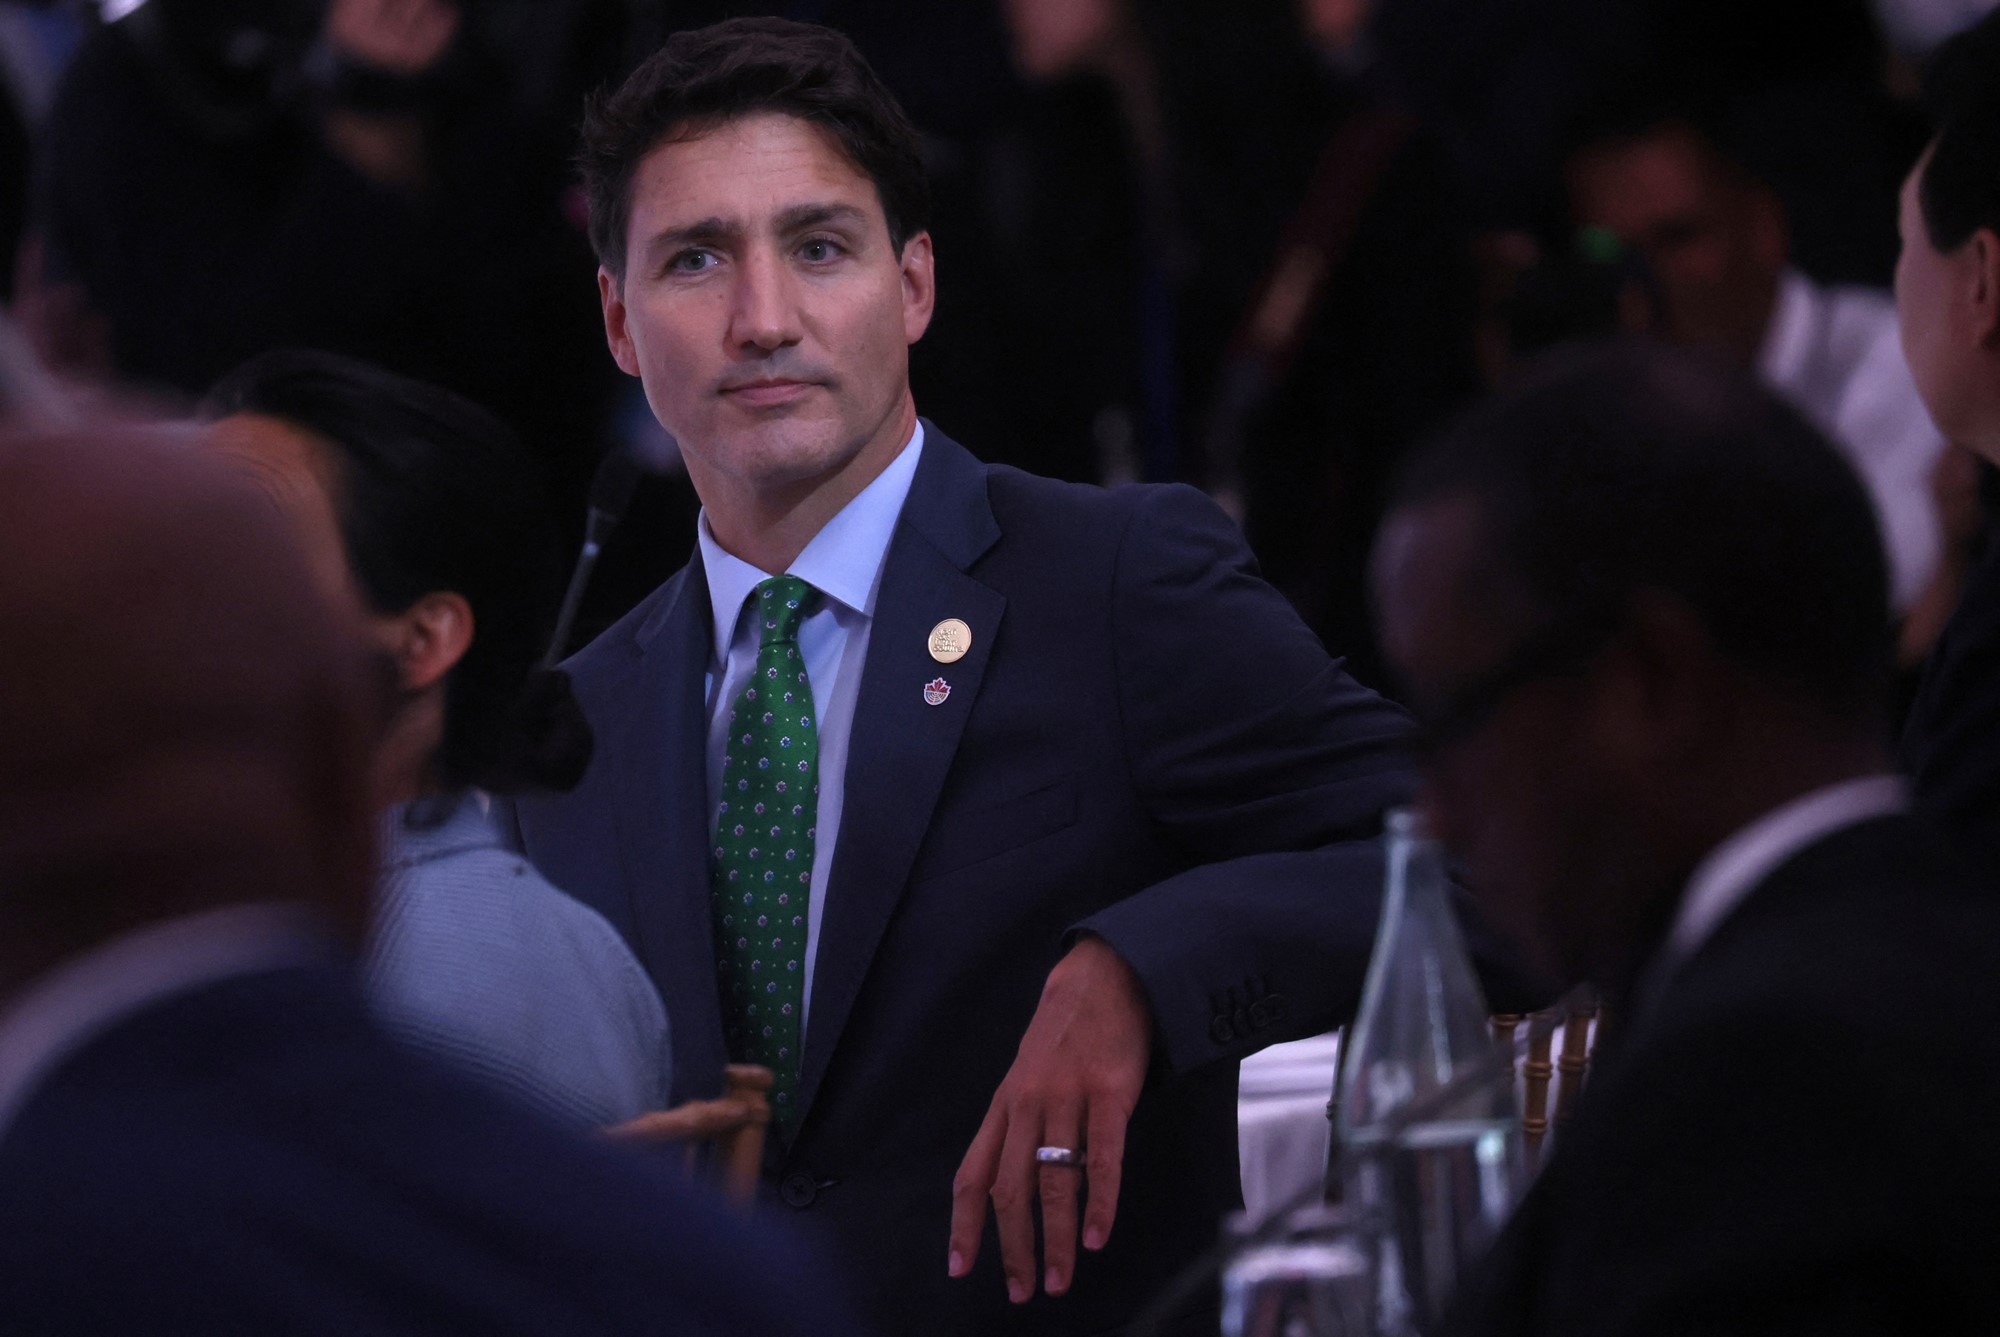 Justin Trudeau looks into a crowd